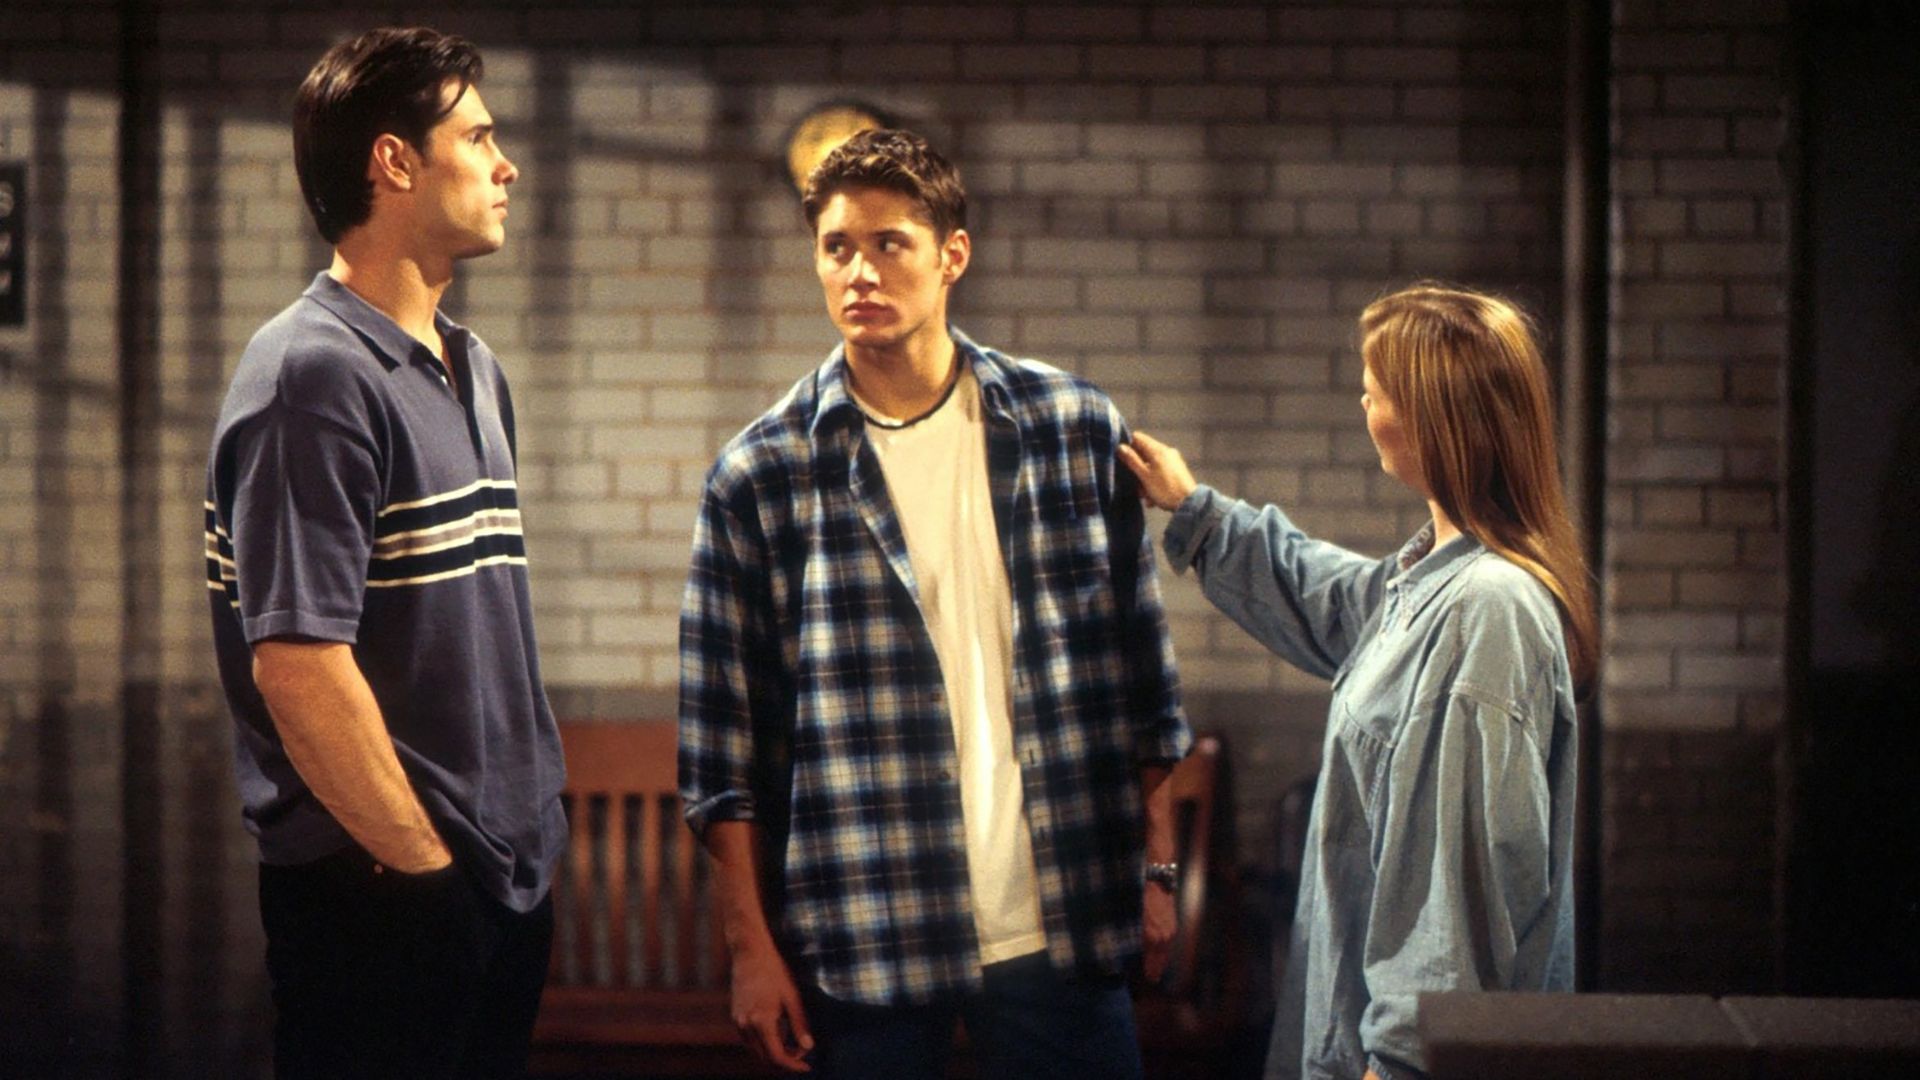 Jensen Ackles in the series 'Days of Our Lives'